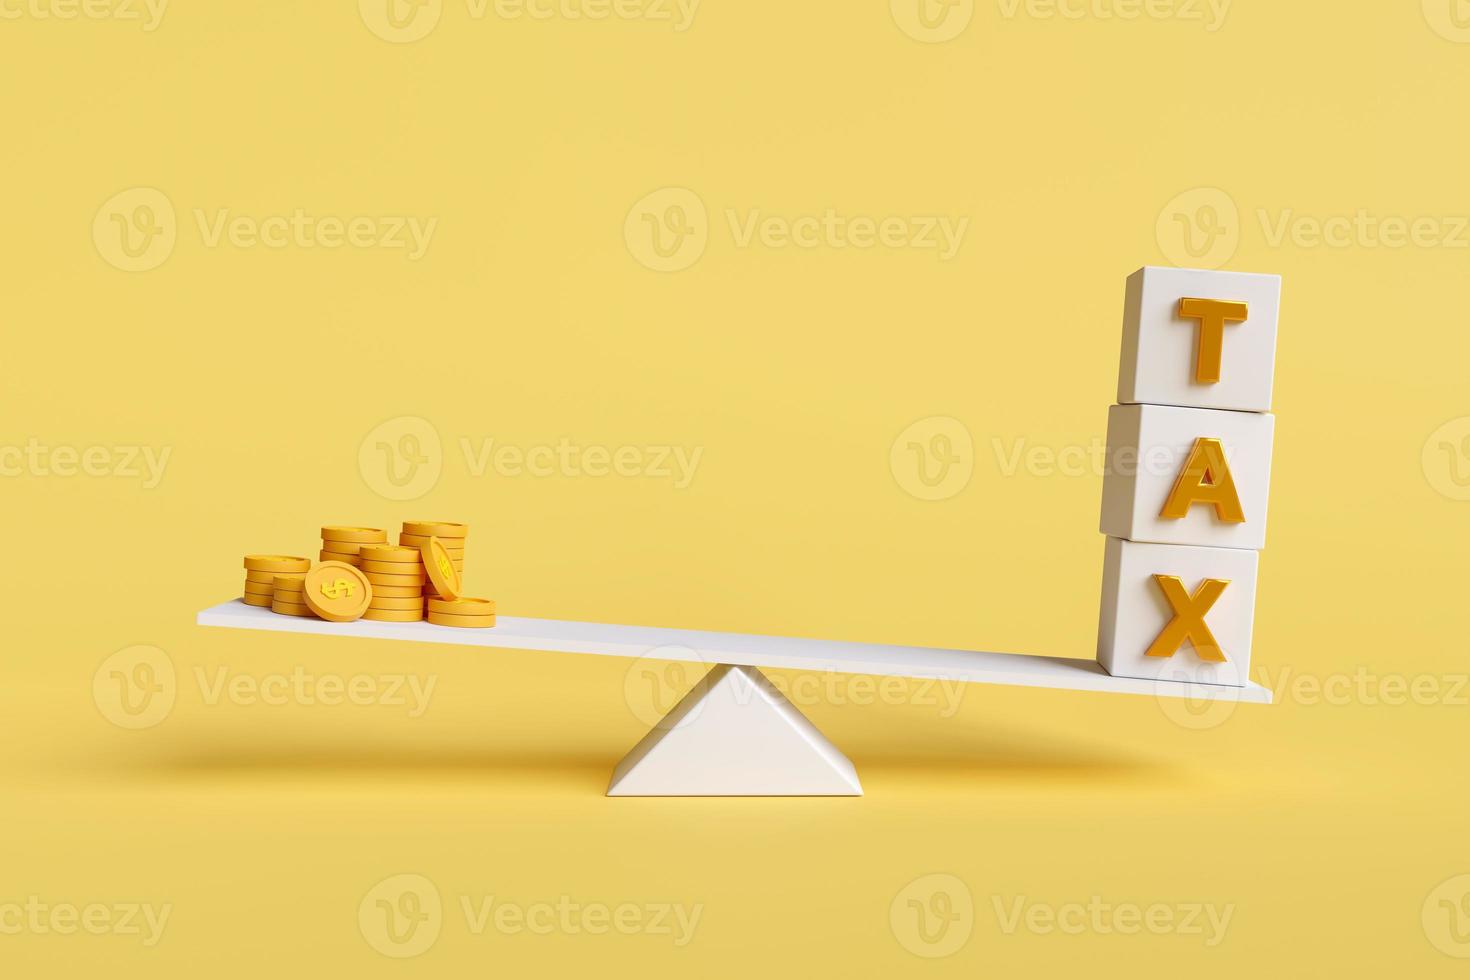 Compare stacks of gold coins, dollars, and taxes on scale boards. Tax payment concept, business tax, government percentage calculation, and tax validation for payment. 3D render illustration. photo